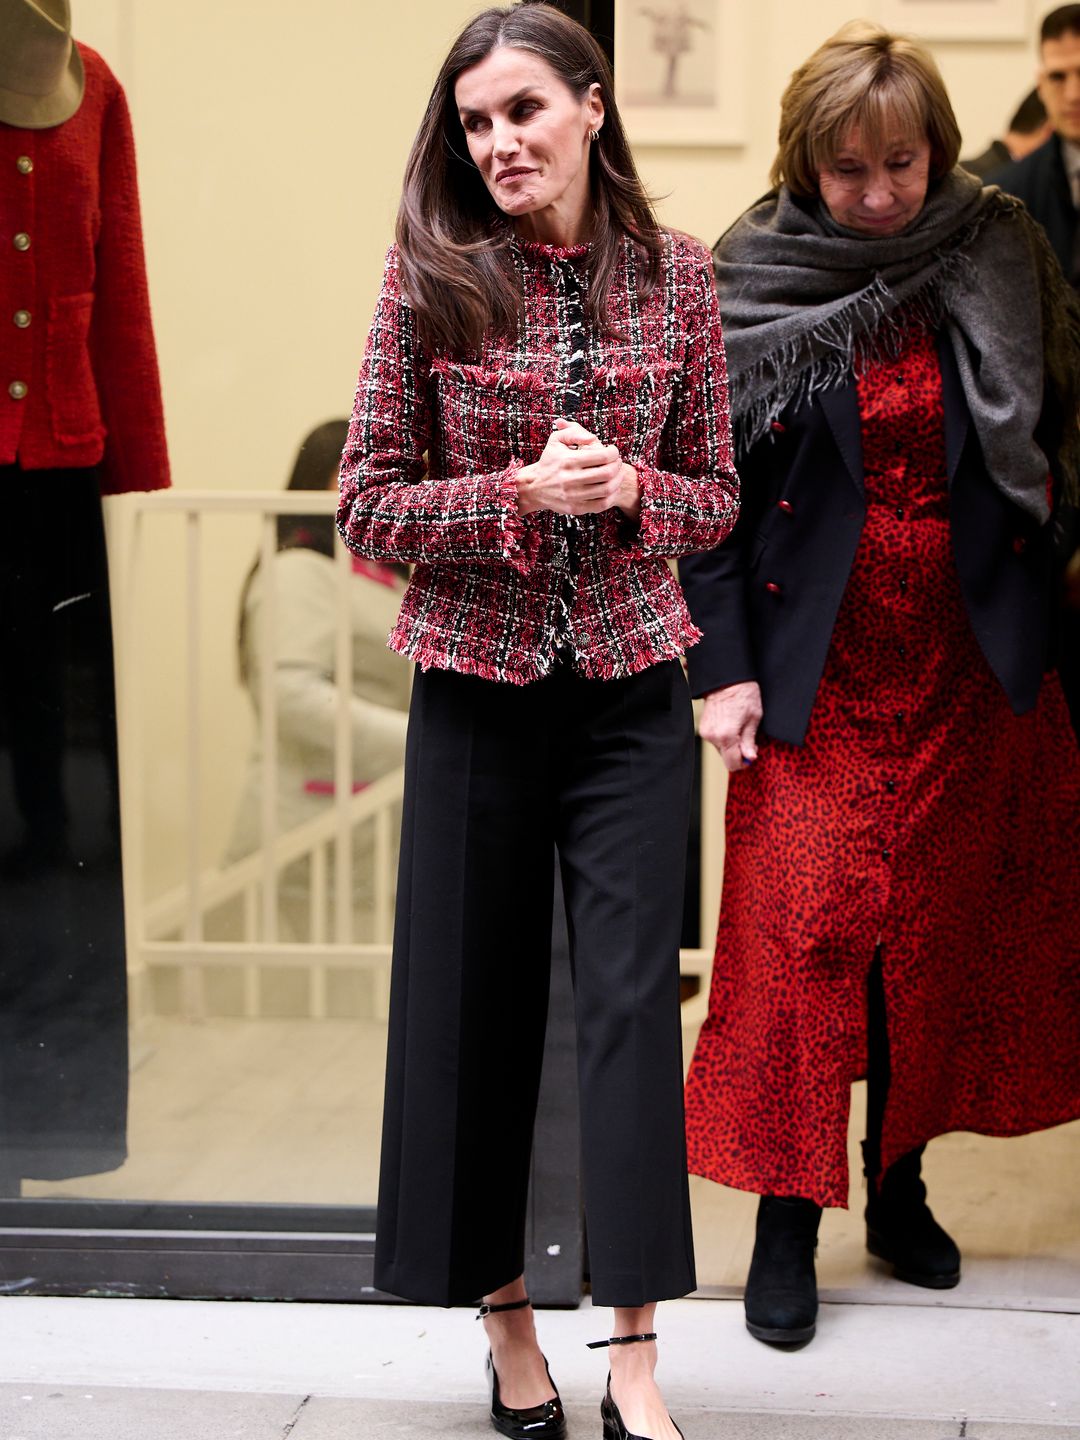 ueen Letizia from Spain visits the central headquarters of the Association for Prevention, Reintegration in a tailor-made jacket with black trousers and ballerinas